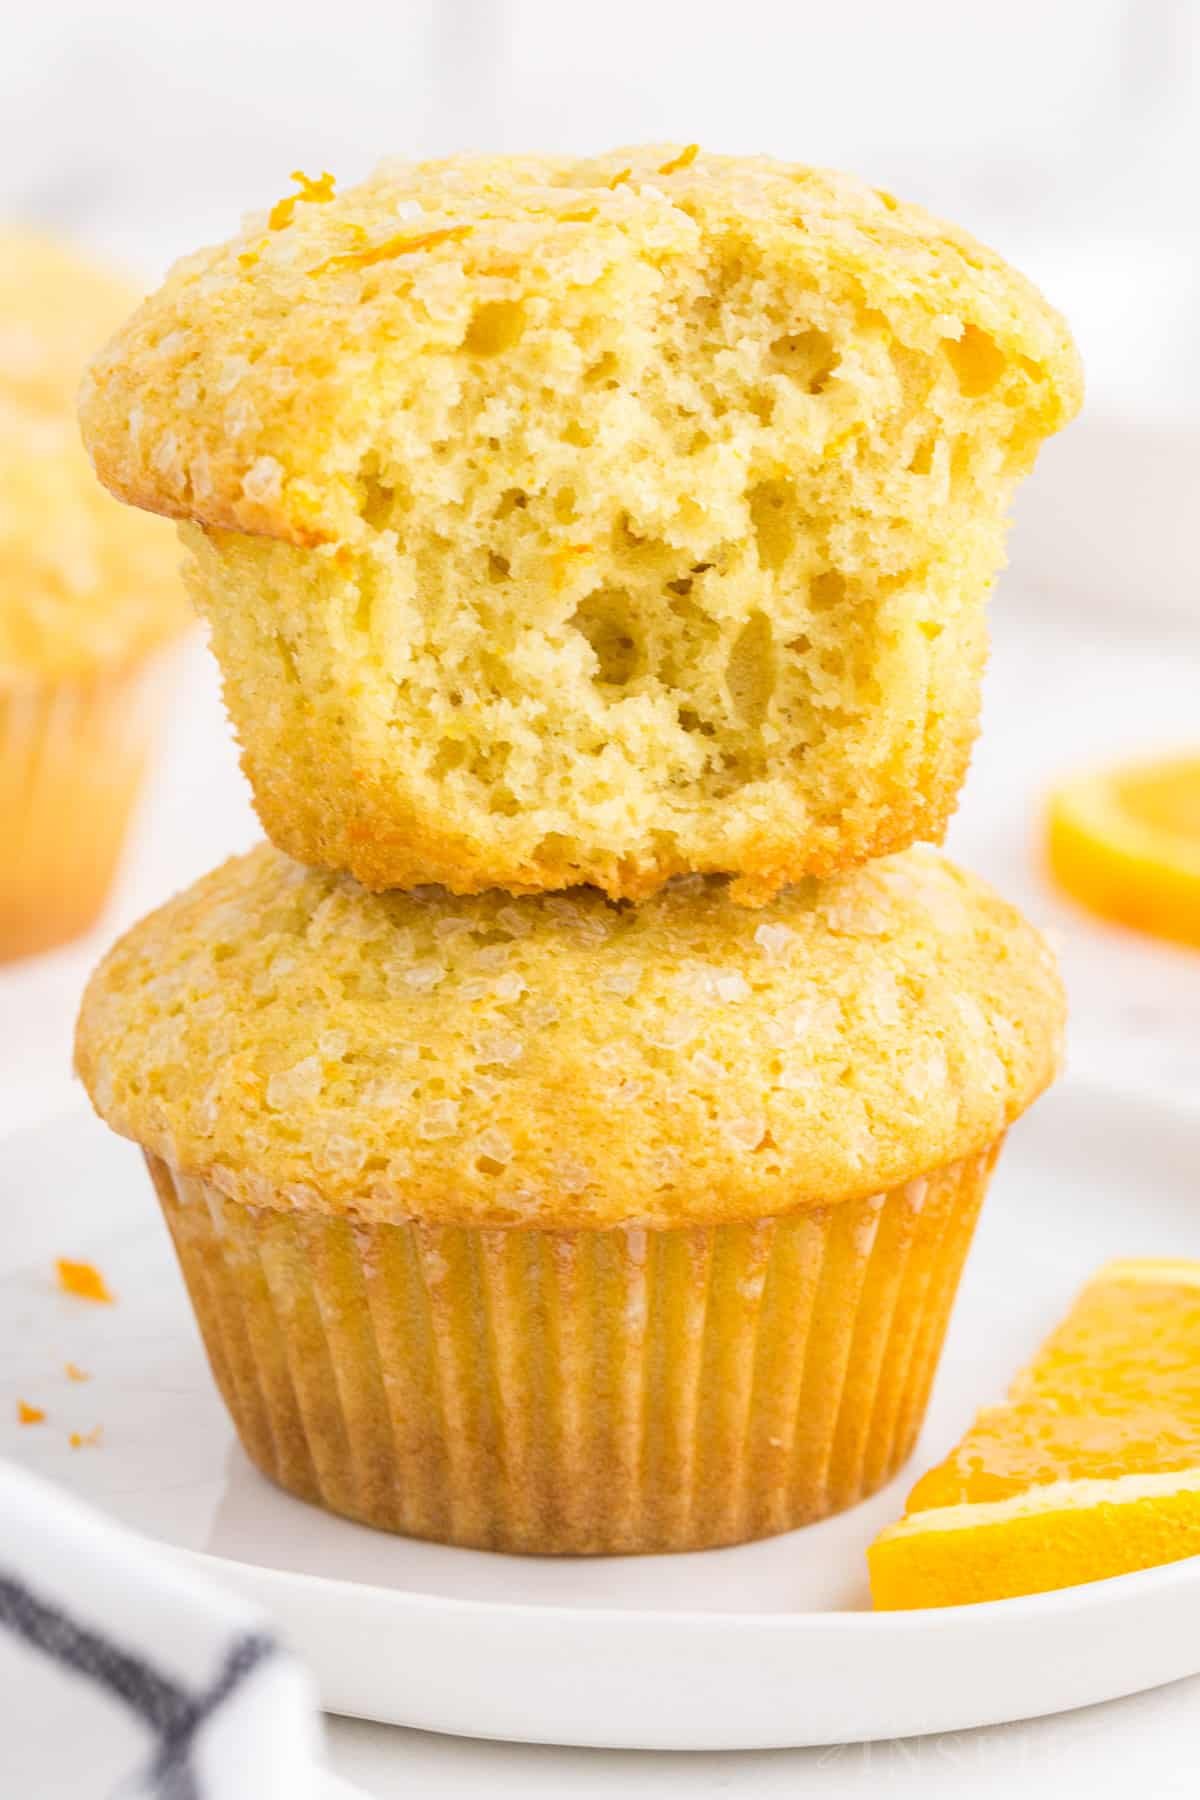 Close-up of two stacked orange muffins with a mouthful taken from the top muffin.